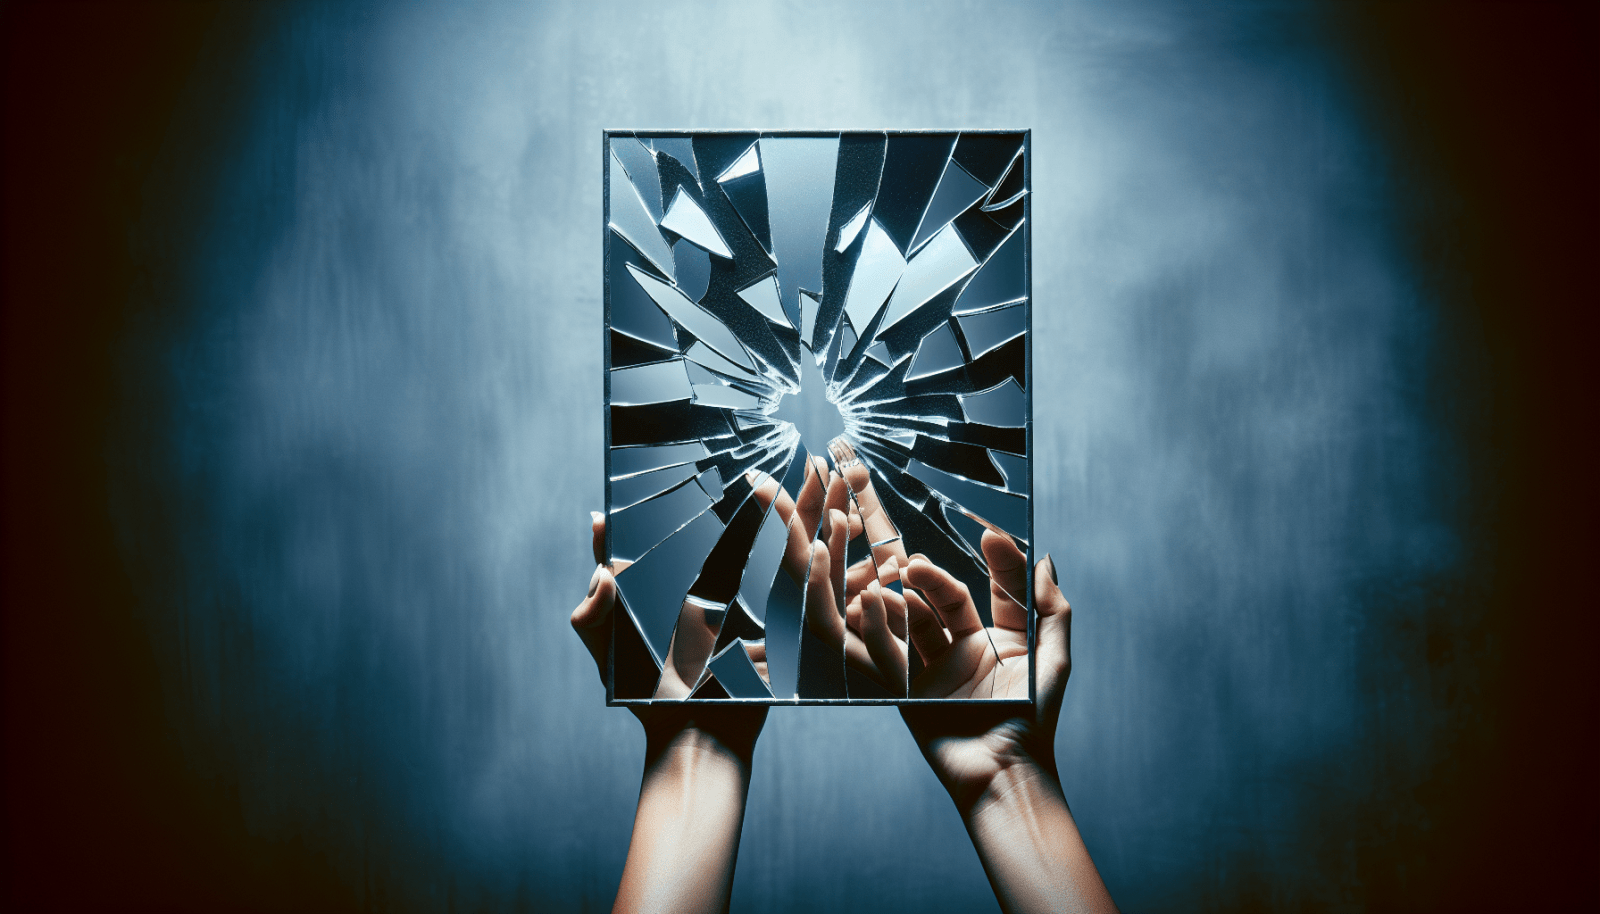 A pair of hands holding a square mirror with a shattered surface, creating a spiderweb effect, against a dark, misty blue background.